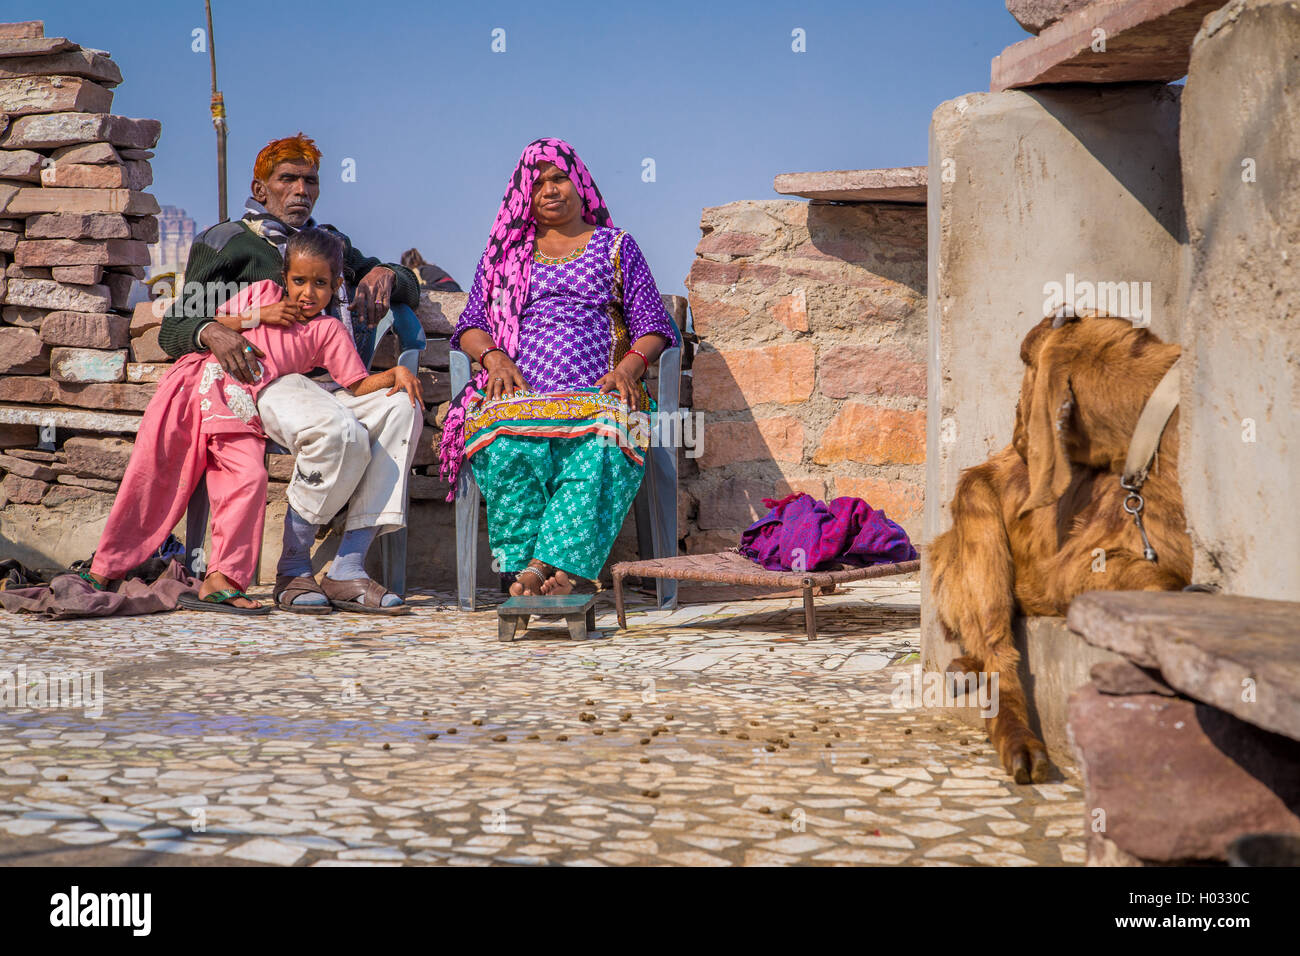 JODHPUR, INDIA - 09 FEBRUARY 2015: Grandparents rest with granddaughter on roof terrace of home with goat sitting close by. Stock Photo